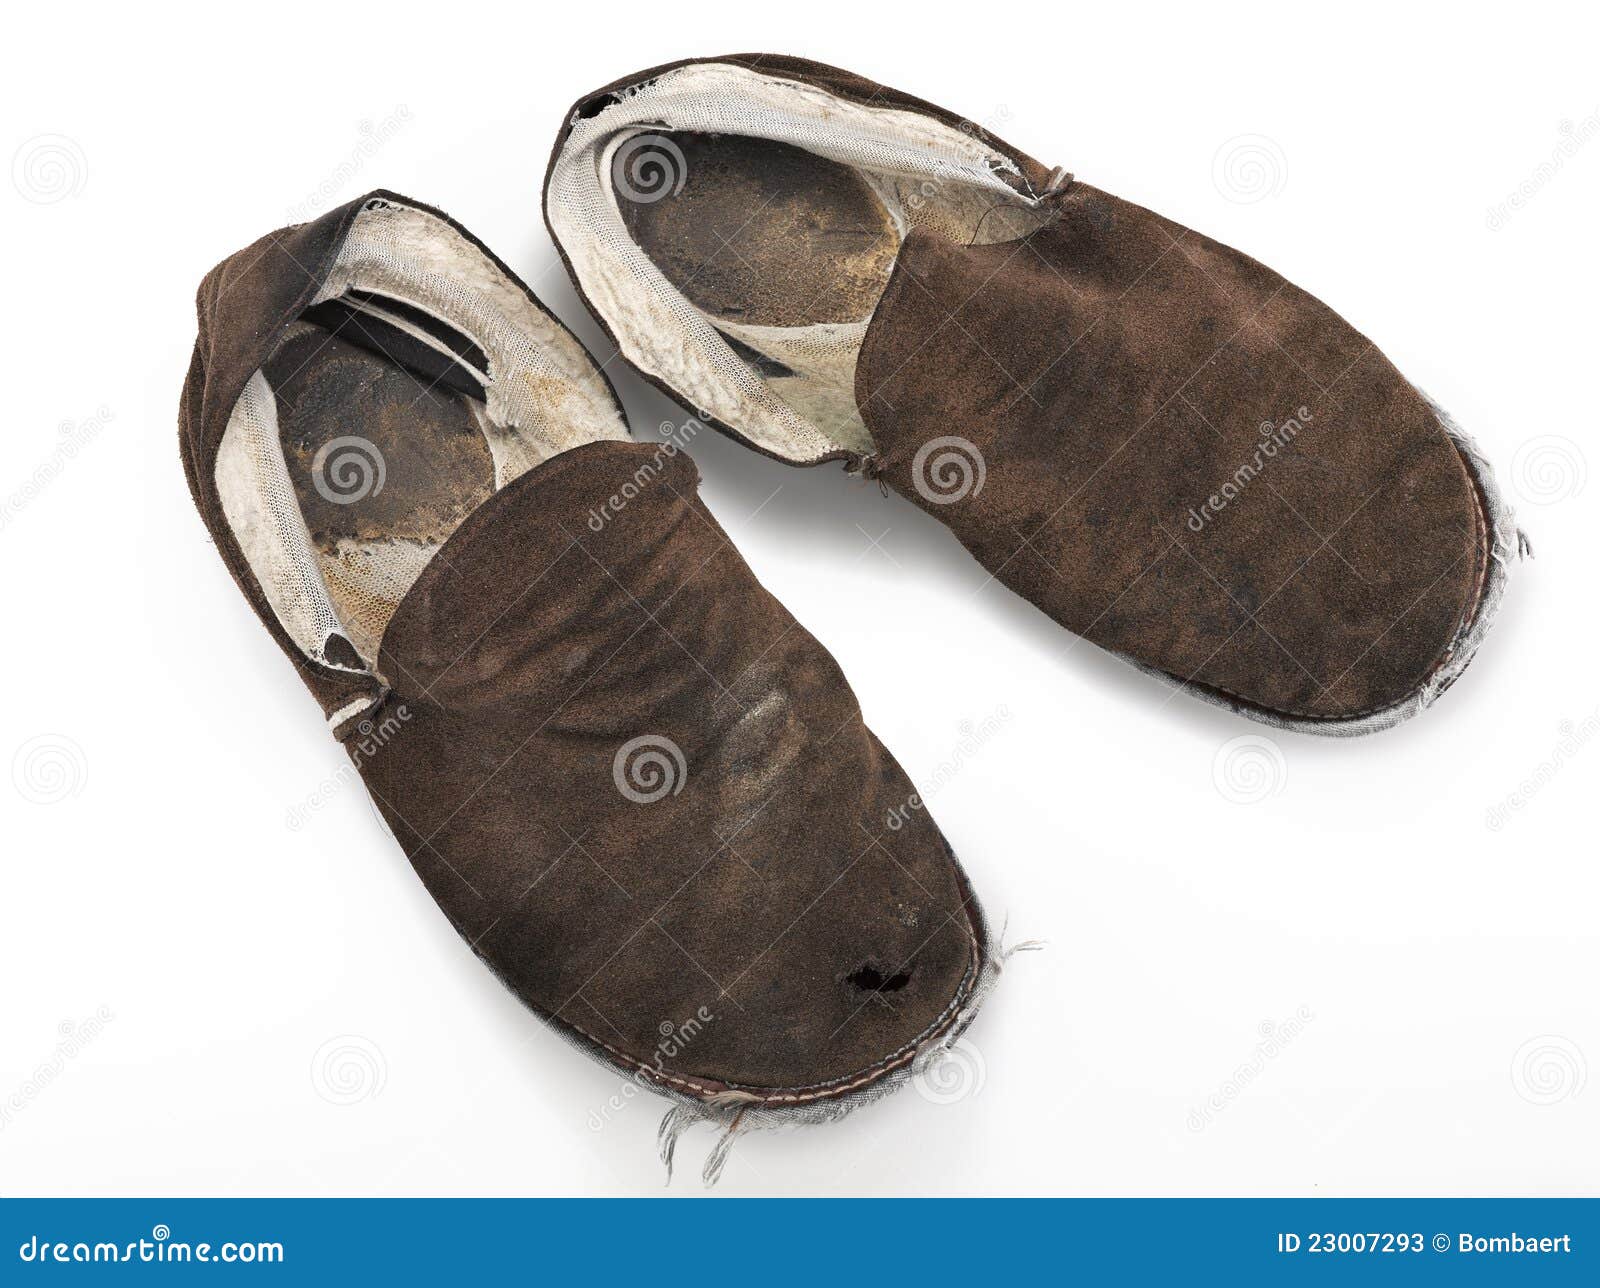 A Pair Of Old, Ratty House Slippers Stock Photos - Image: 23007293